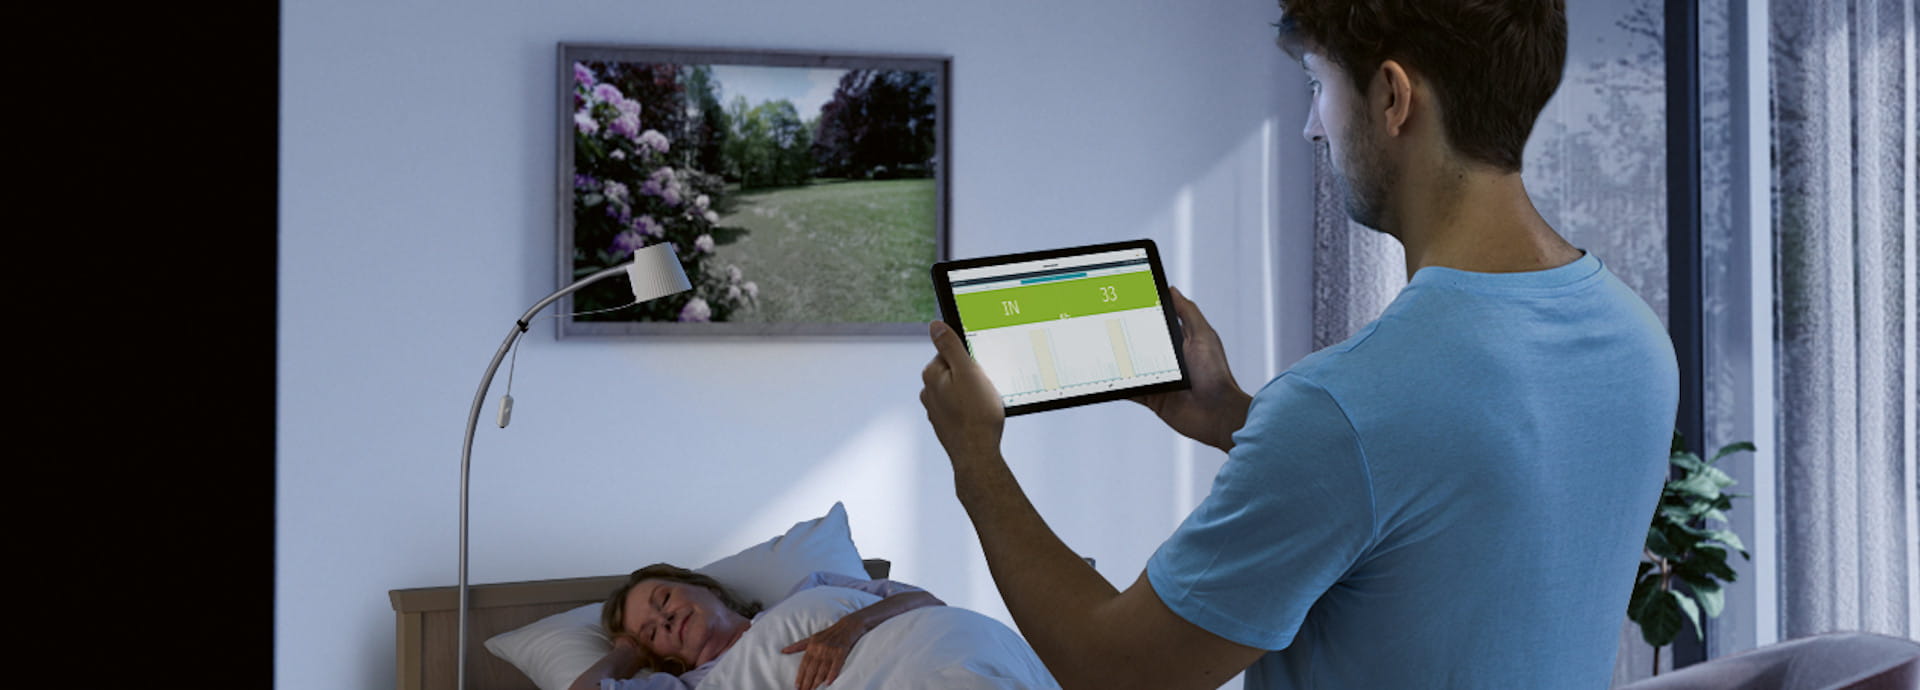 SafeSense 3 - Your digital care assistant for a continuous real-time resident monitoring